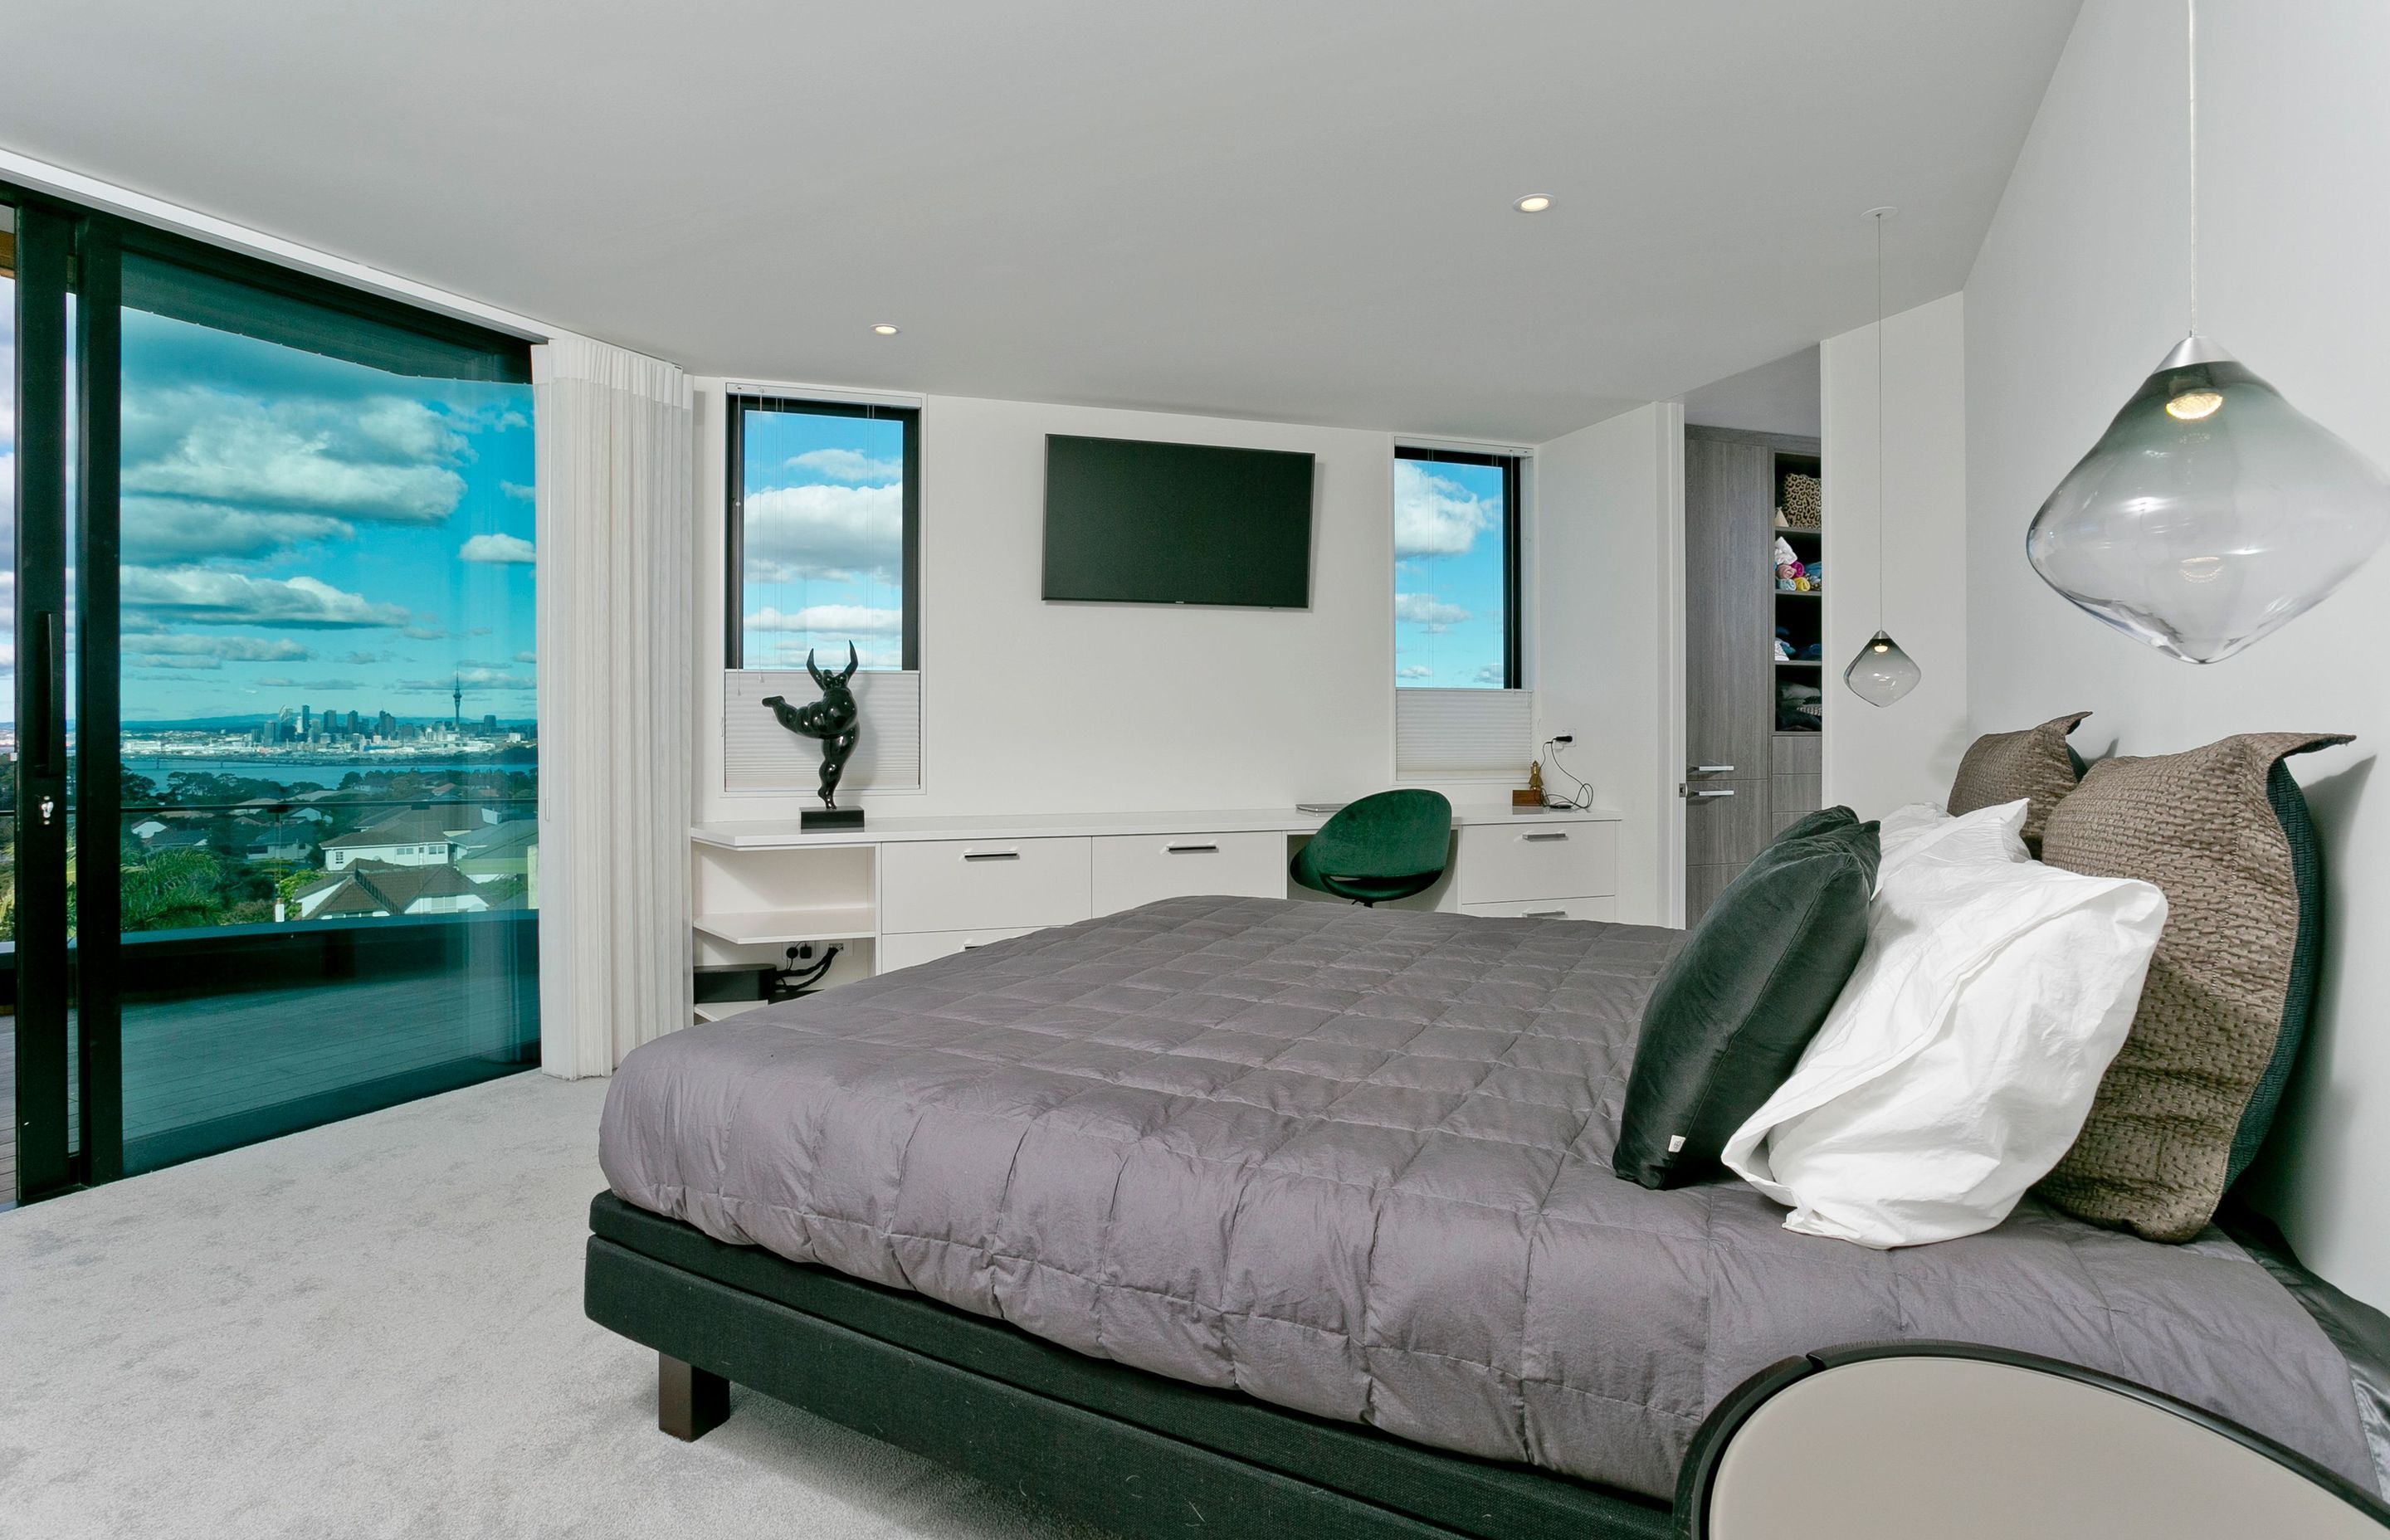 The master bedroom enjoys a balcony of its own and similar panoramic views of Auckland city.